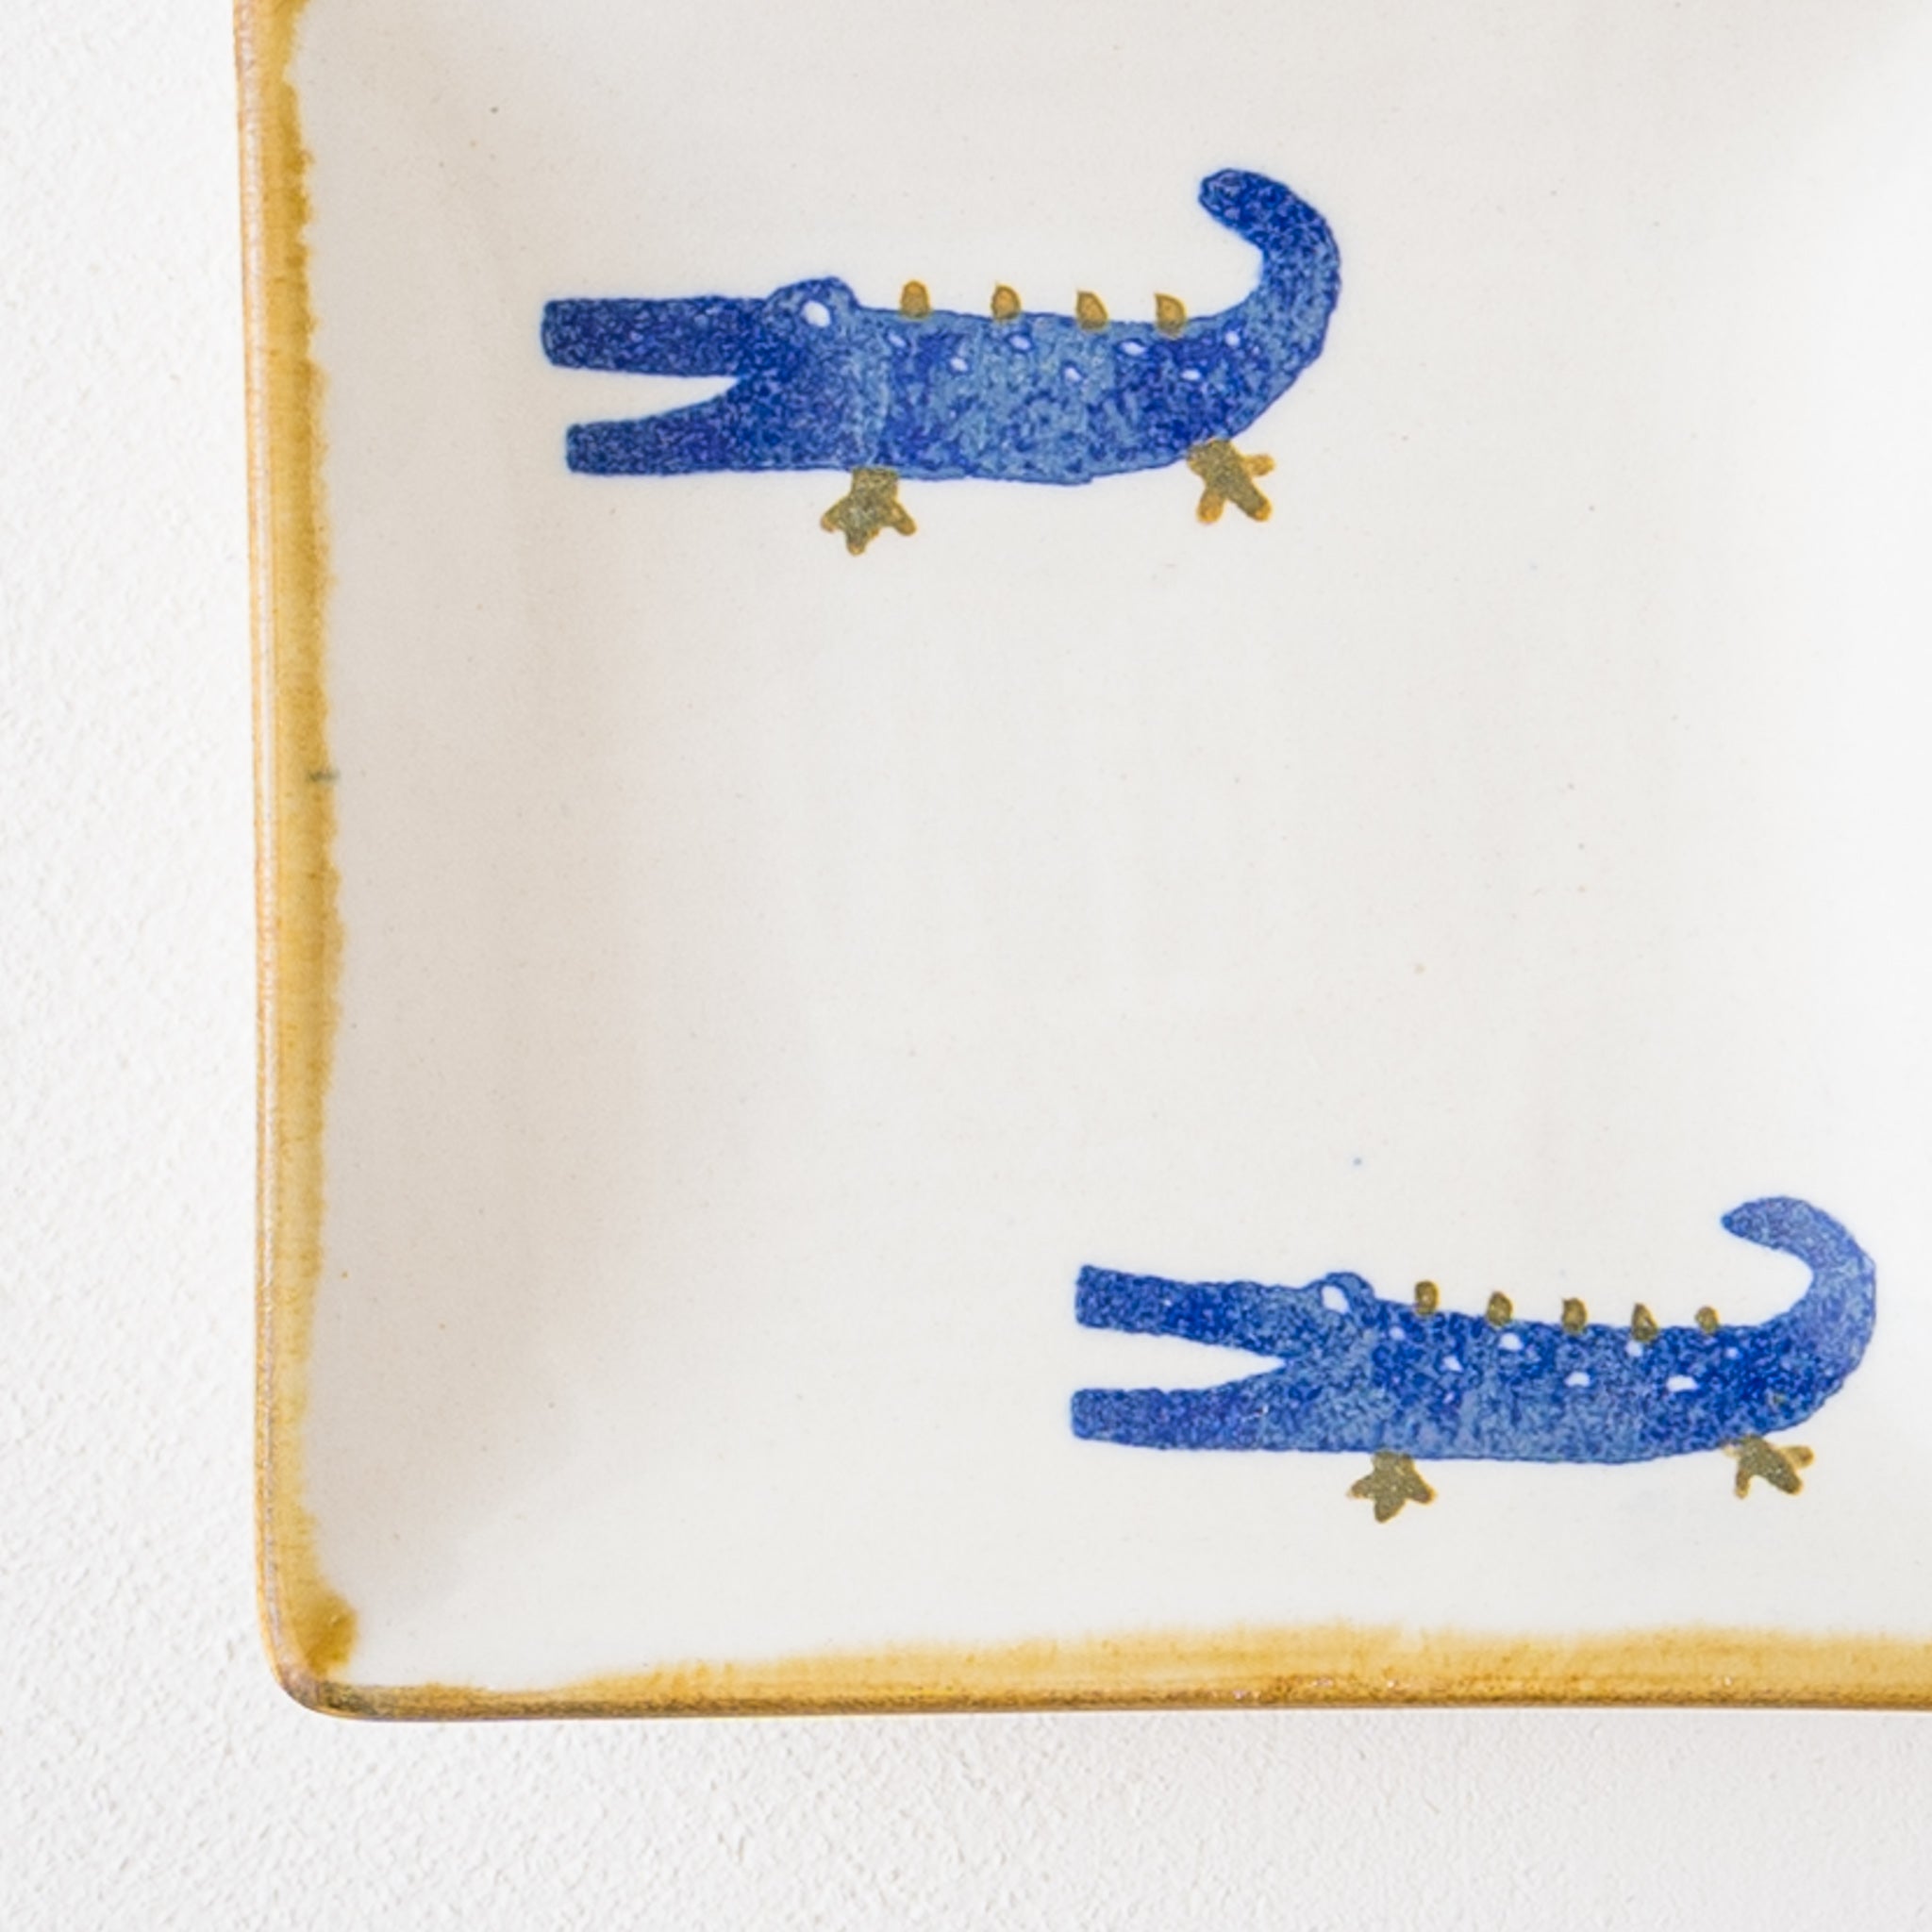 A small square plate from Yasumi Koubou that warms your heart with a cute Japanese paper-dyed crocodile